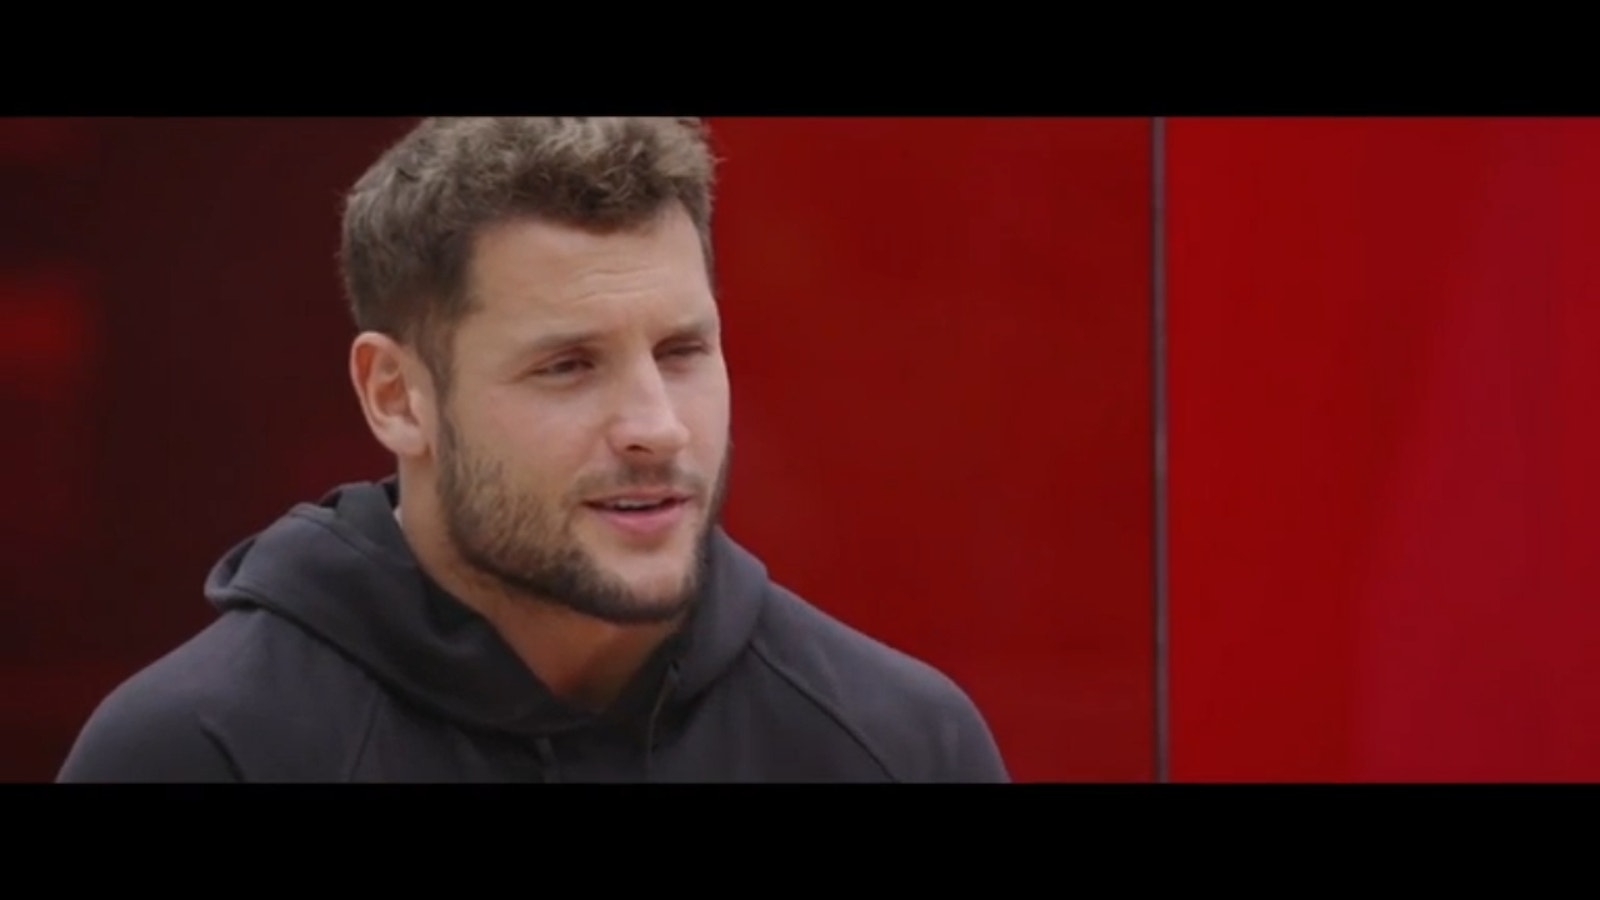 Nick Bosa on re-signing with the 49ers and seizing an opportunity